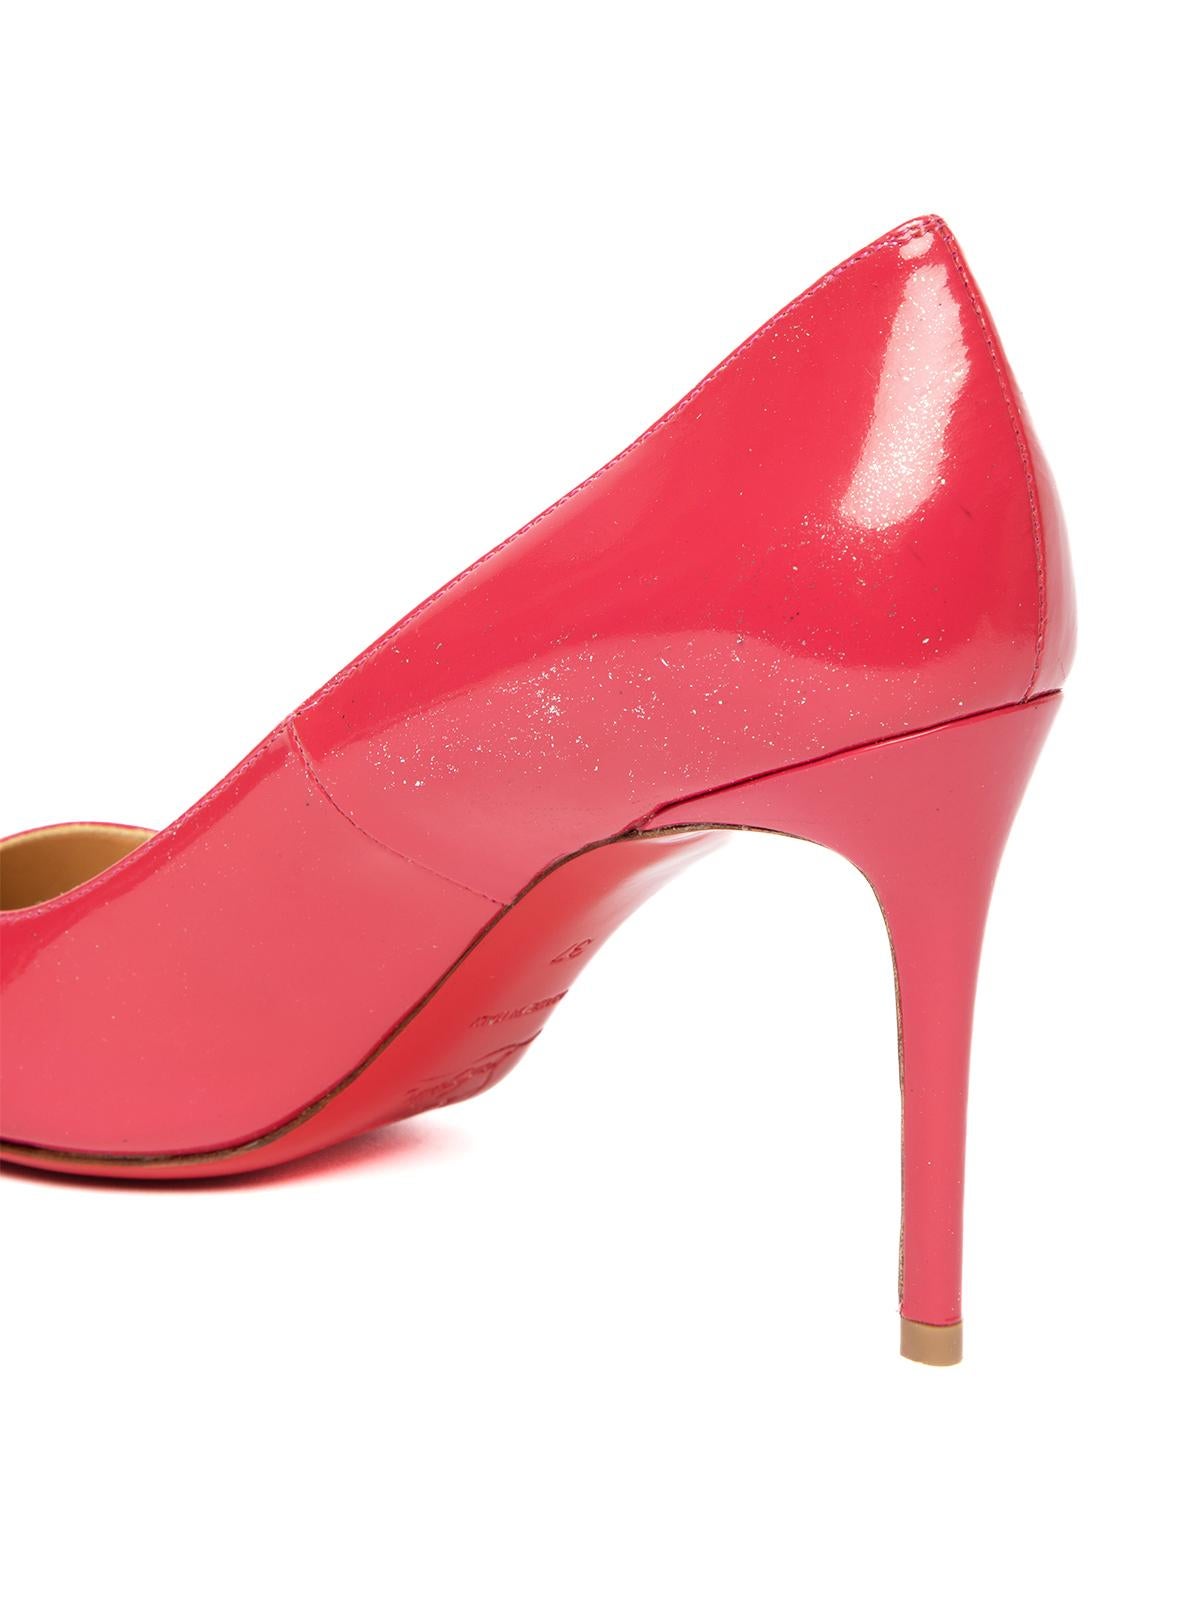 Christian Louboutin Women's Eloise 85 Patent Pumps Pink In Excellent Condition In London, GB